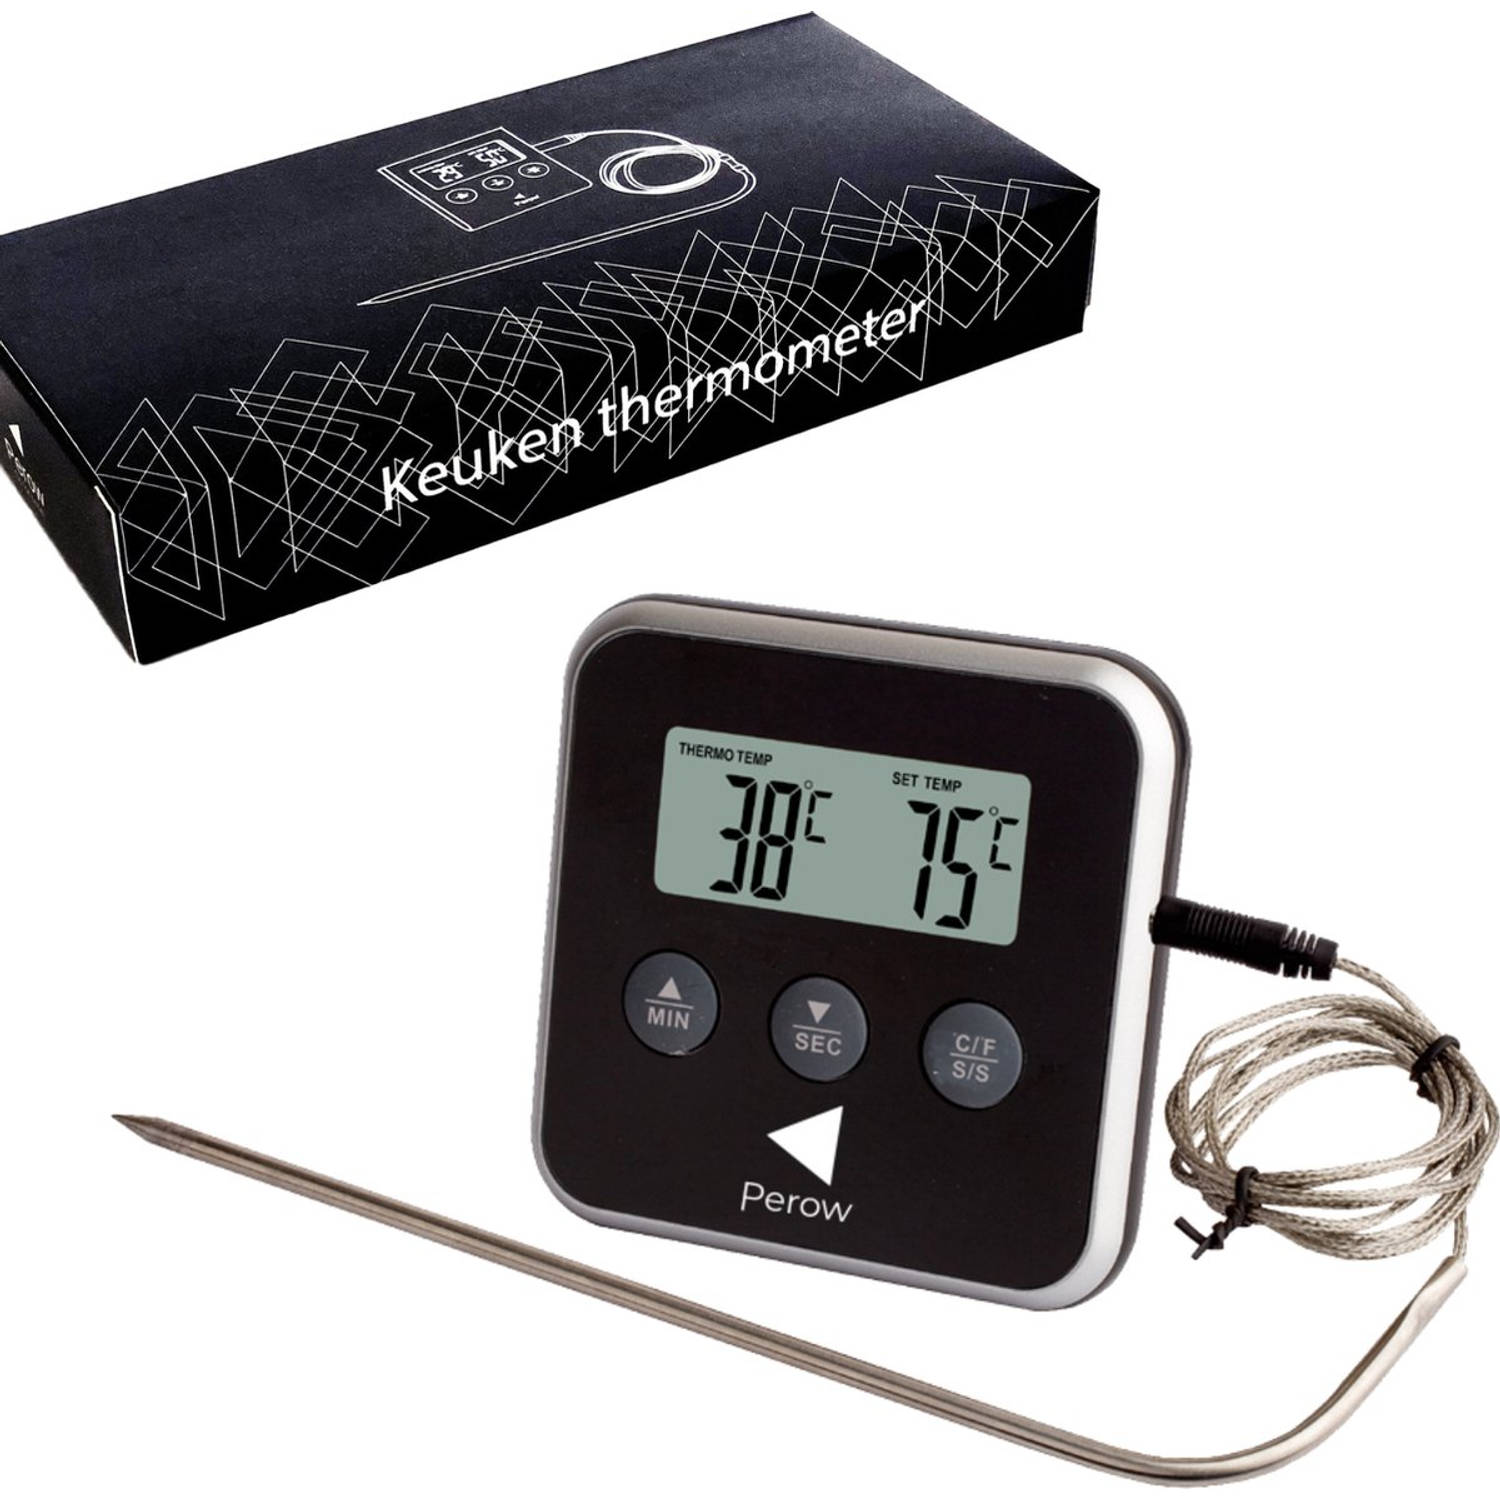 Perow - BBQ Thermometer en Wekker - Zwart - Suikerthermometer - Voedselthermometer